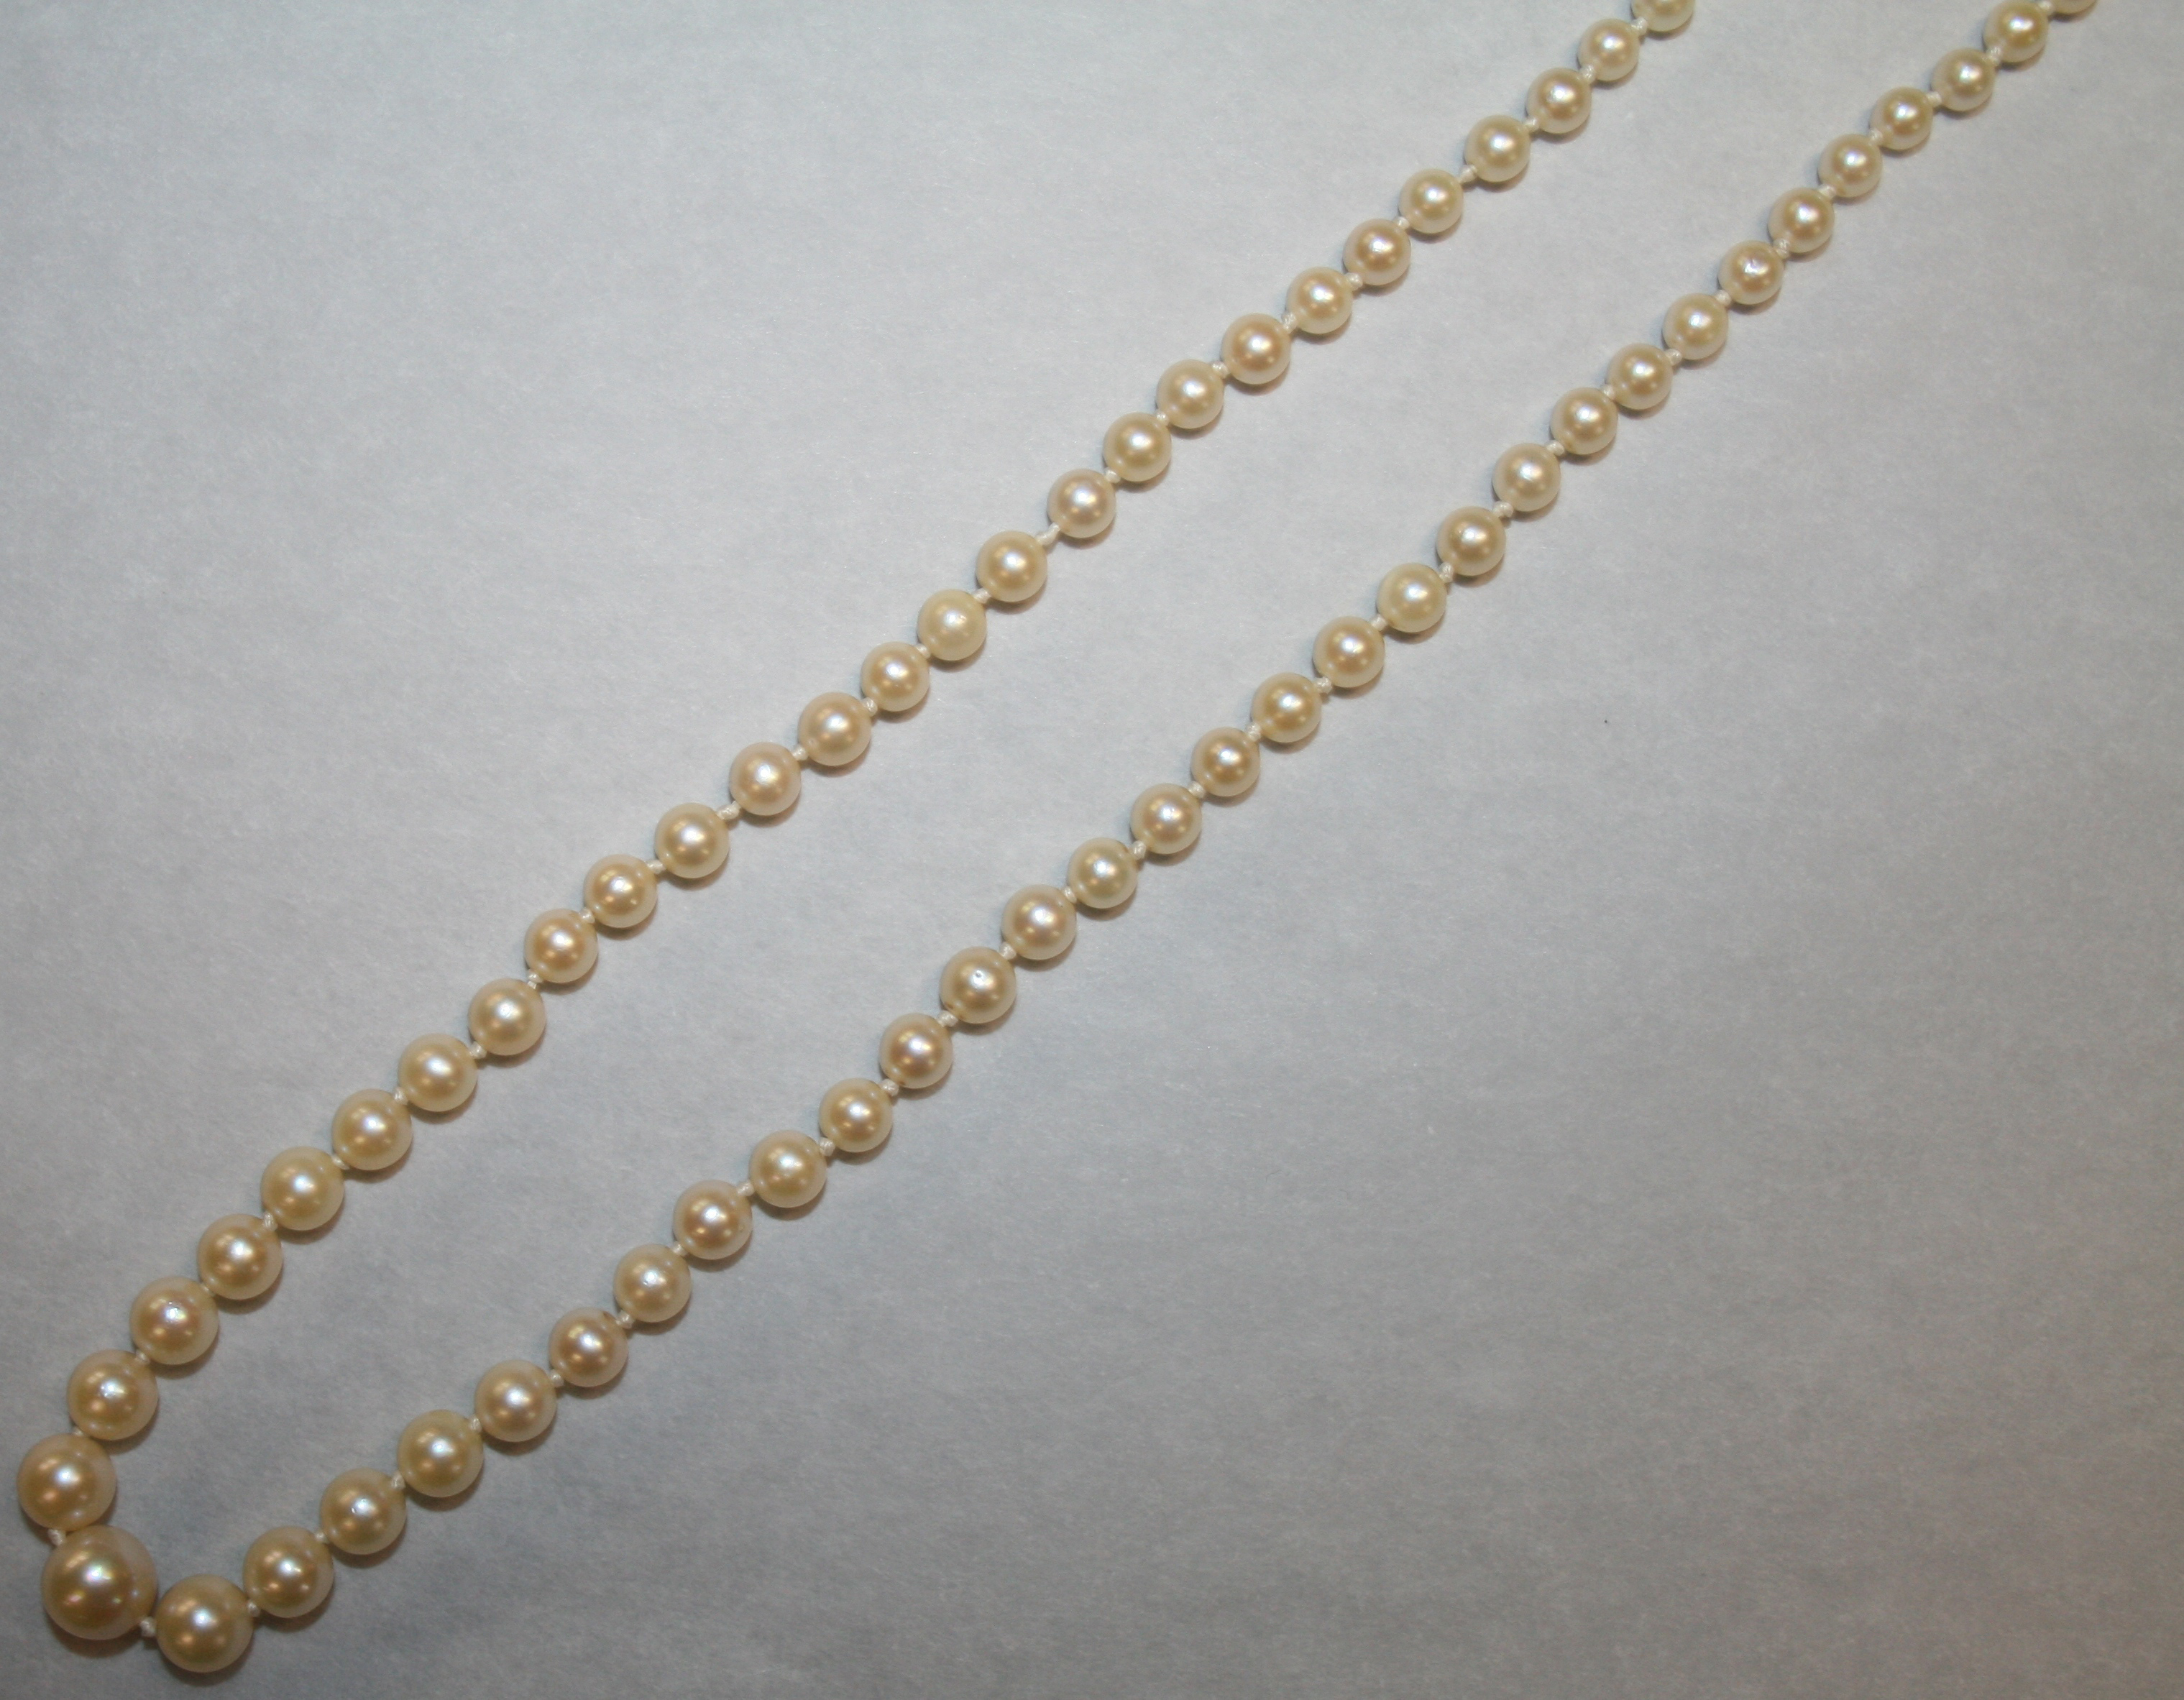 Graduated Pearl Necklace with Gold Clasp - Image 3 of 7